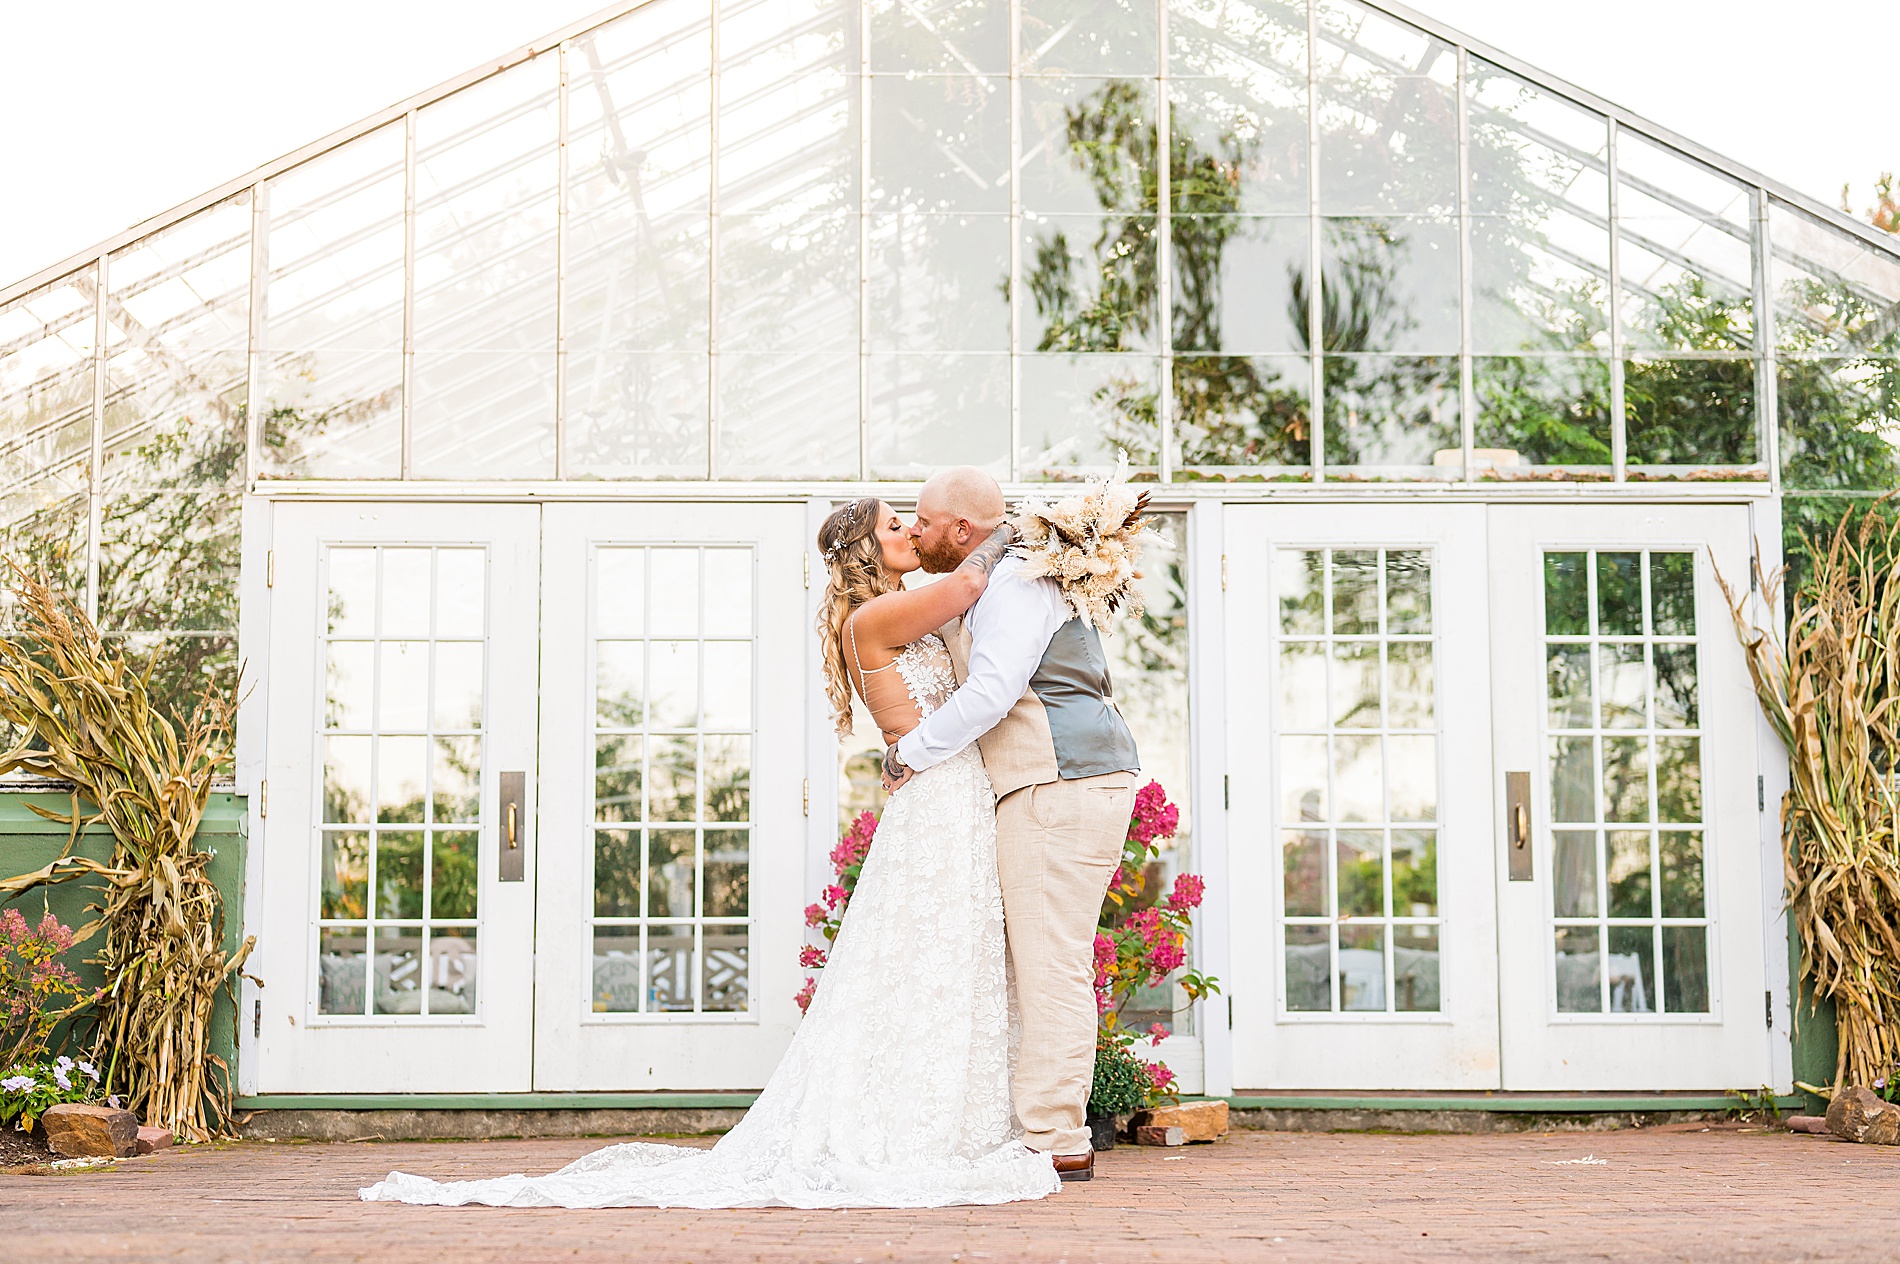 newlyweds kiss in front of greenhouse during wedding portraits 